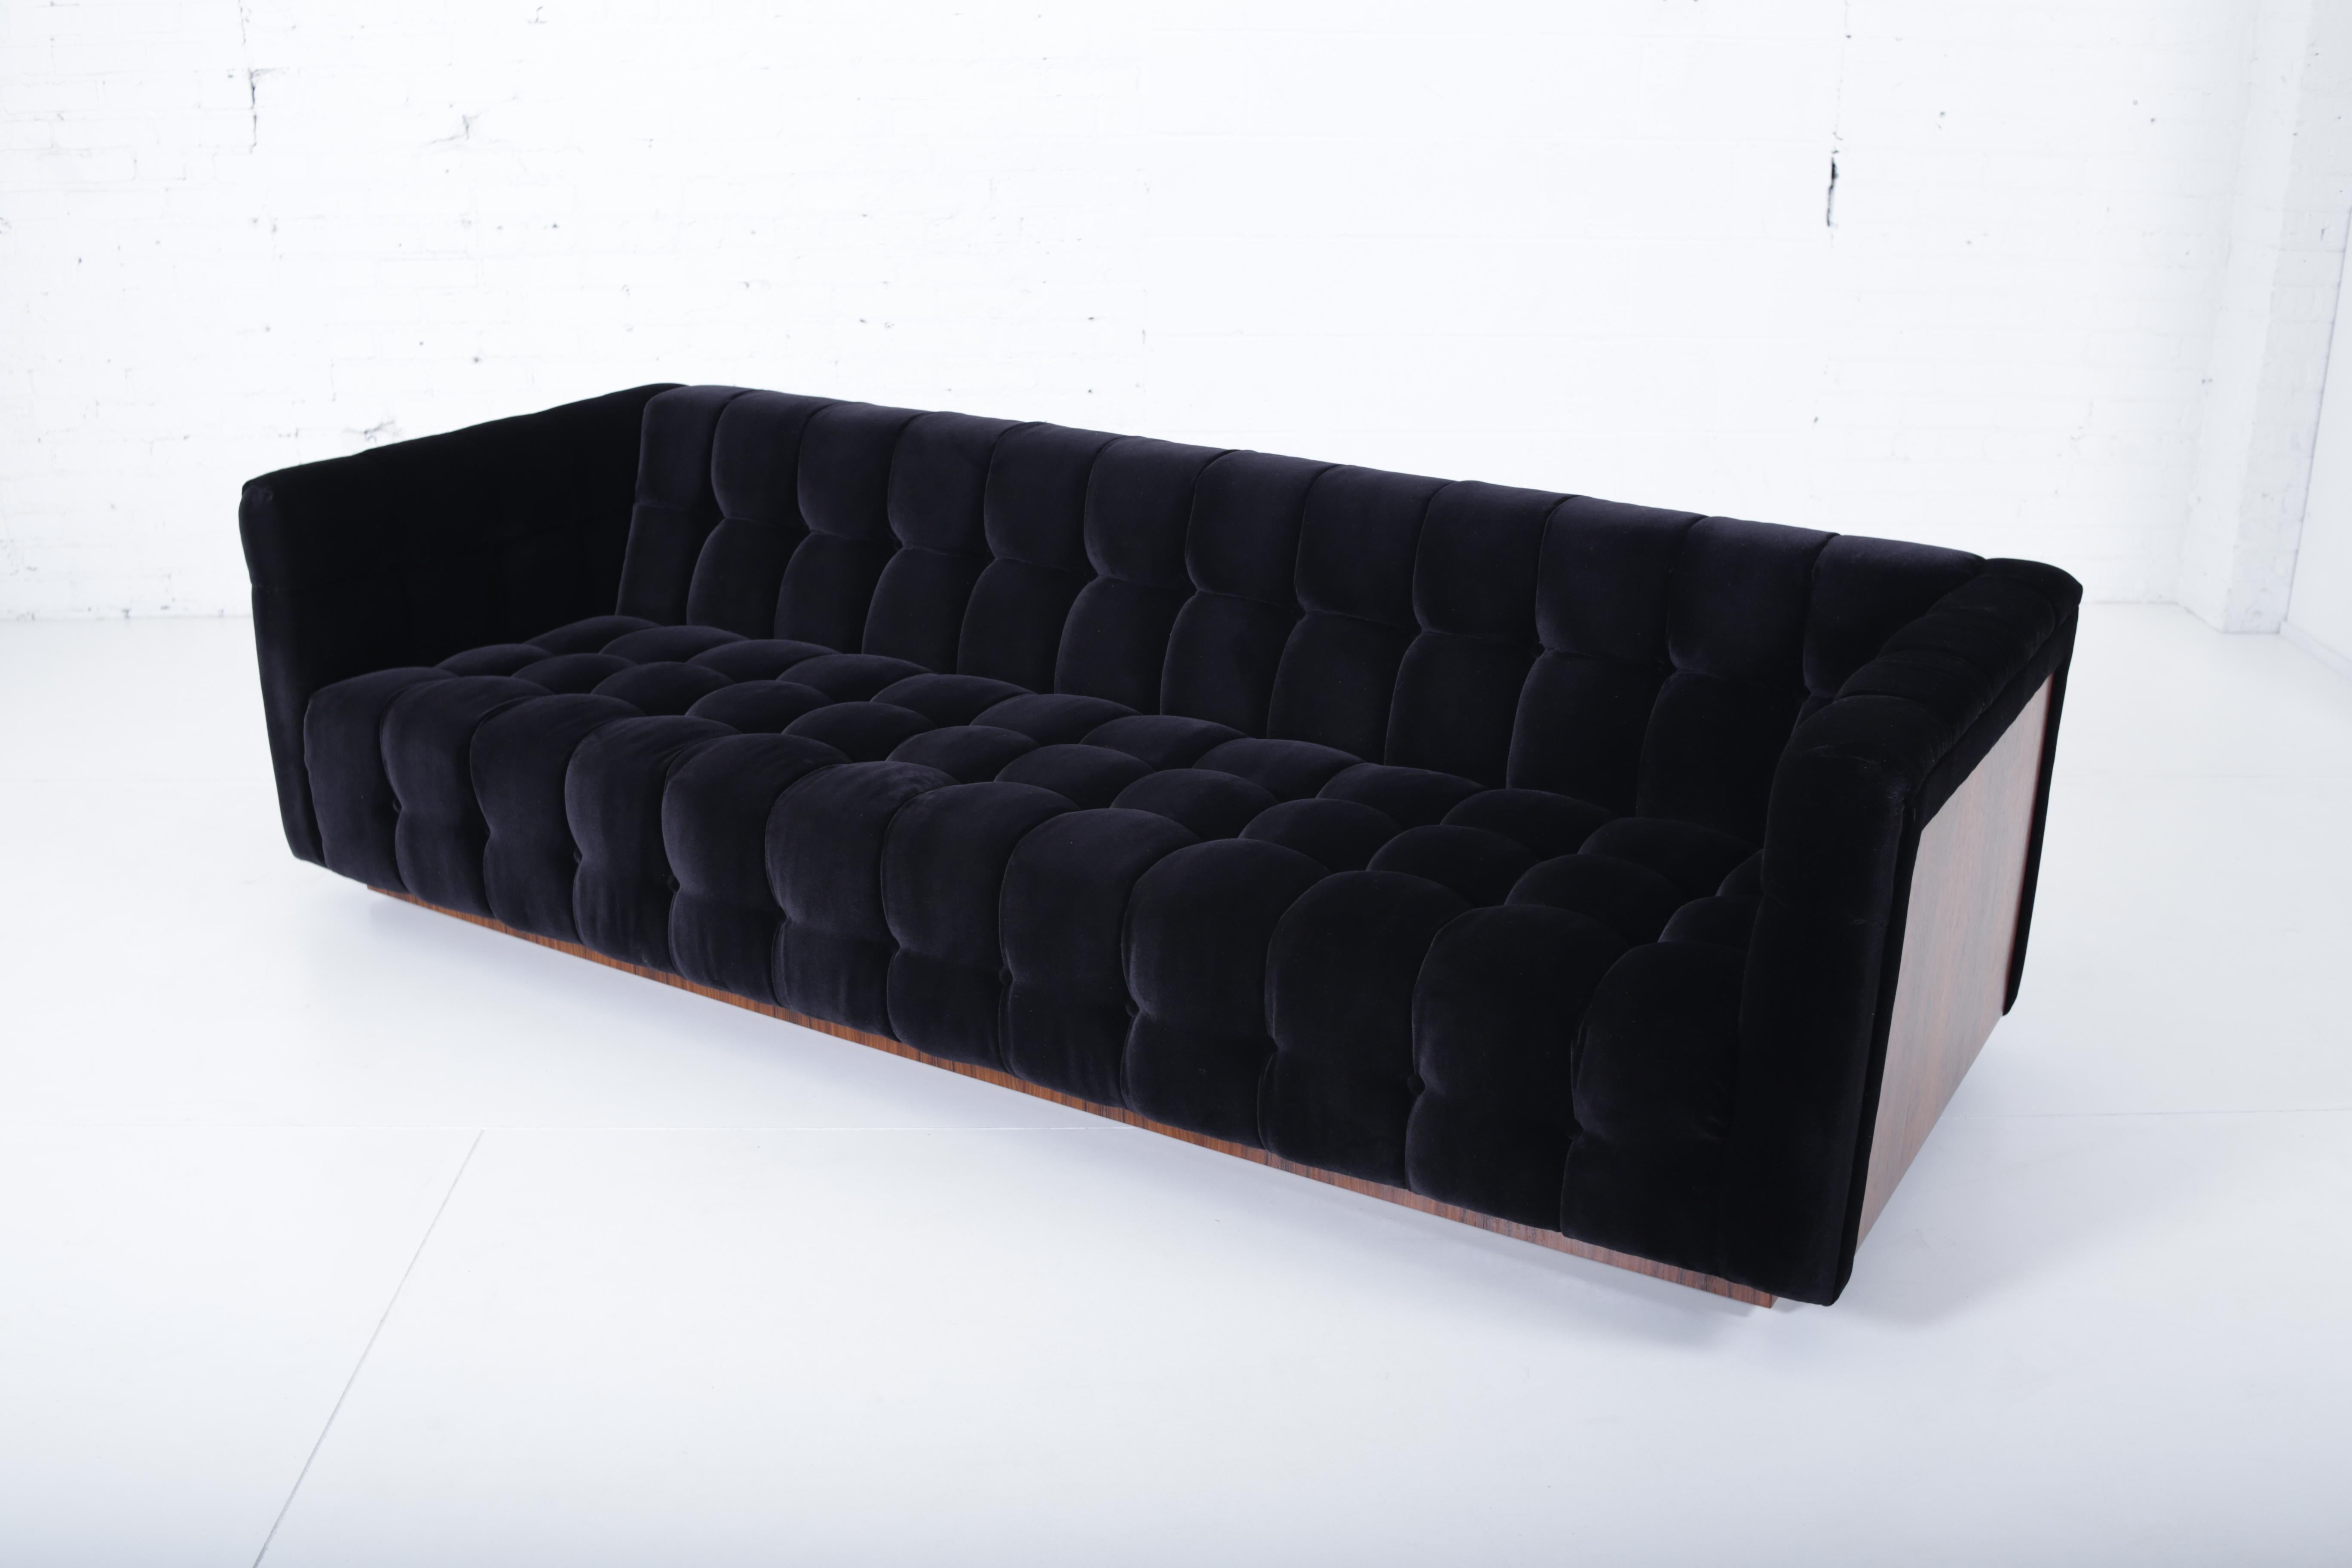 Milo Baughman tuxedo sofa with rosewood panels. Fully restored, refinished, and reupholstered in black velvet.